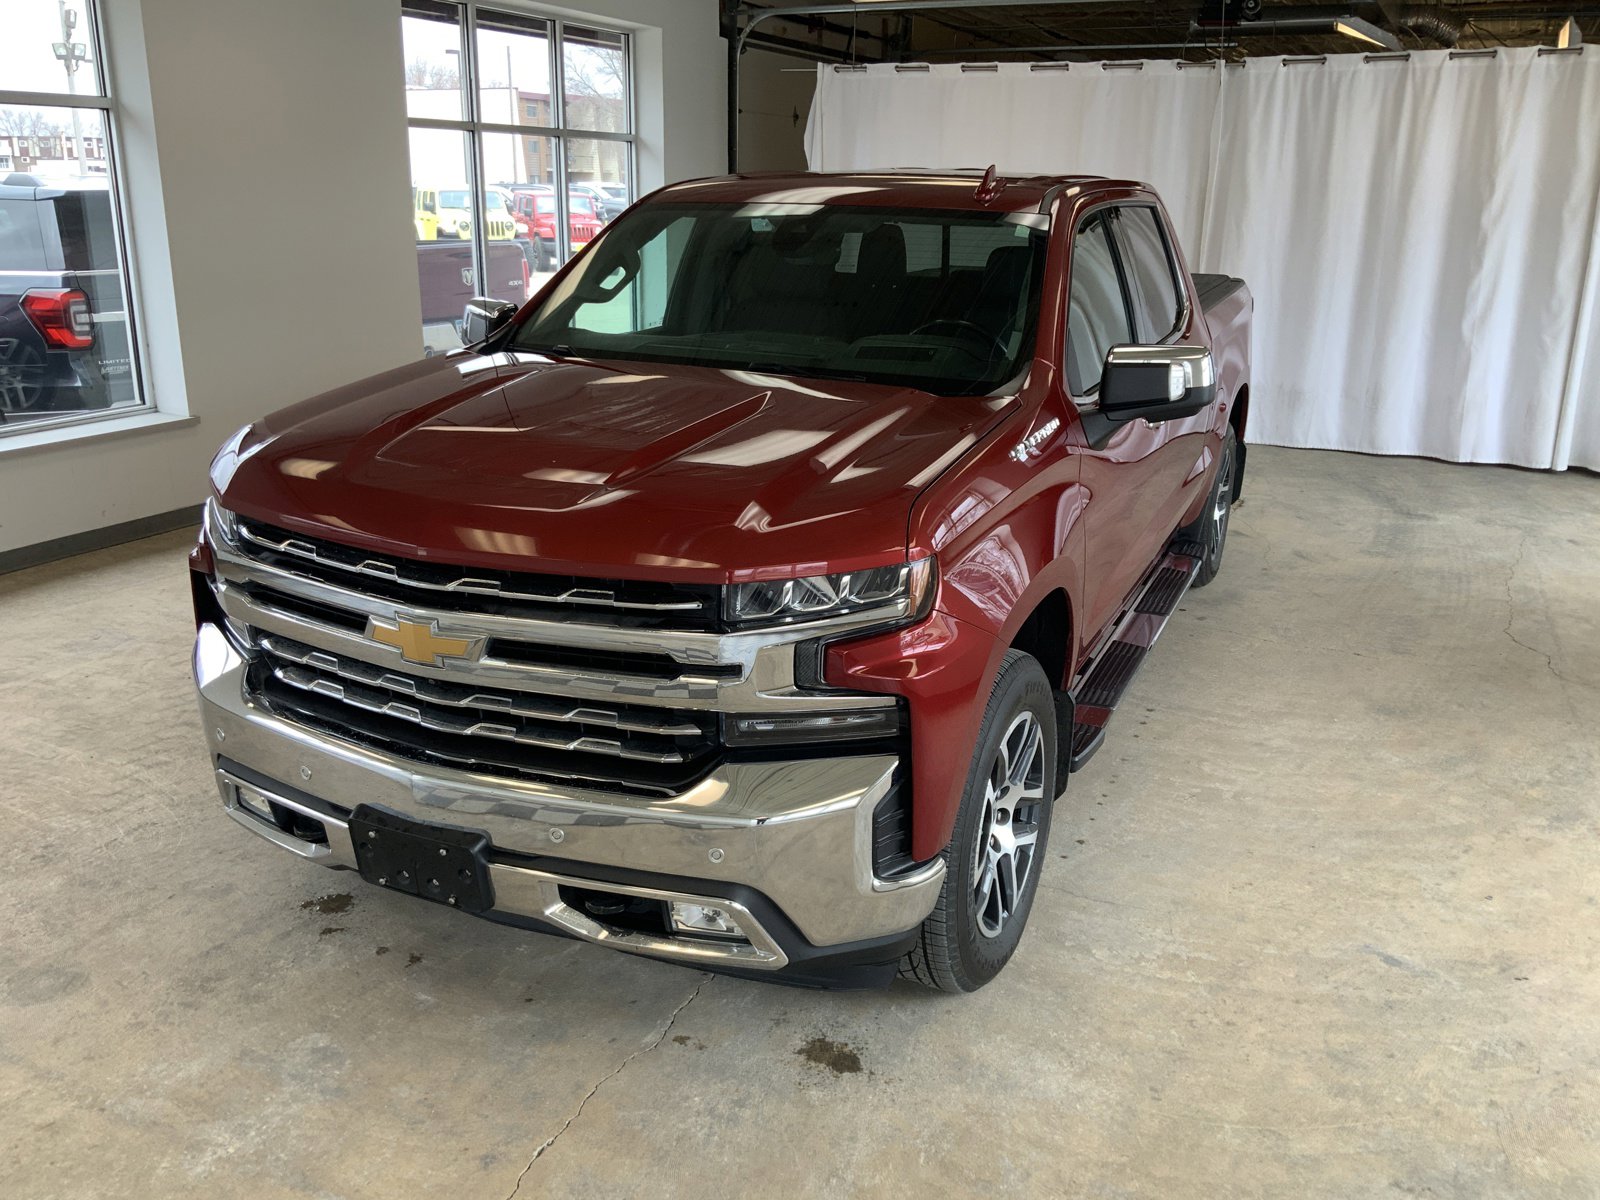 Used 2019 Chevrolet Silverado 1500 LTZ with VIN 3GCUYGED8KG167946 for sale in Alexandria, Minnesota